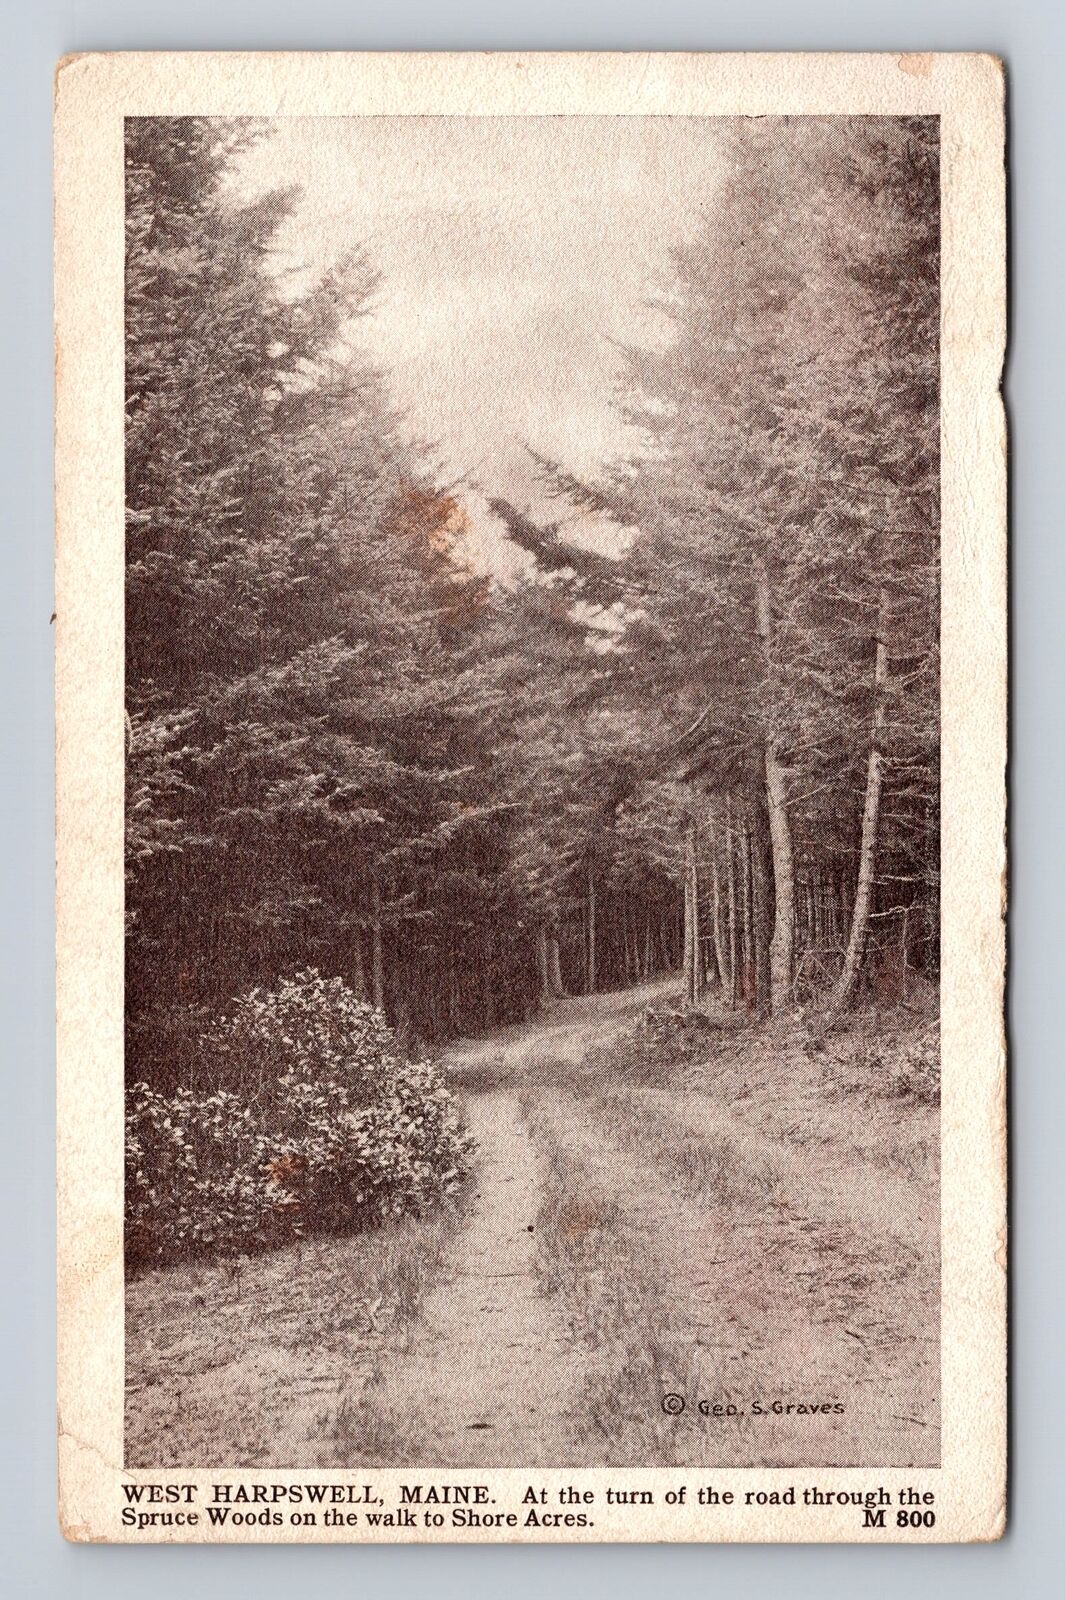 West Harpswell ME-Maine, Road At Spruce Woods, Shore Acres, Vintage Postcard